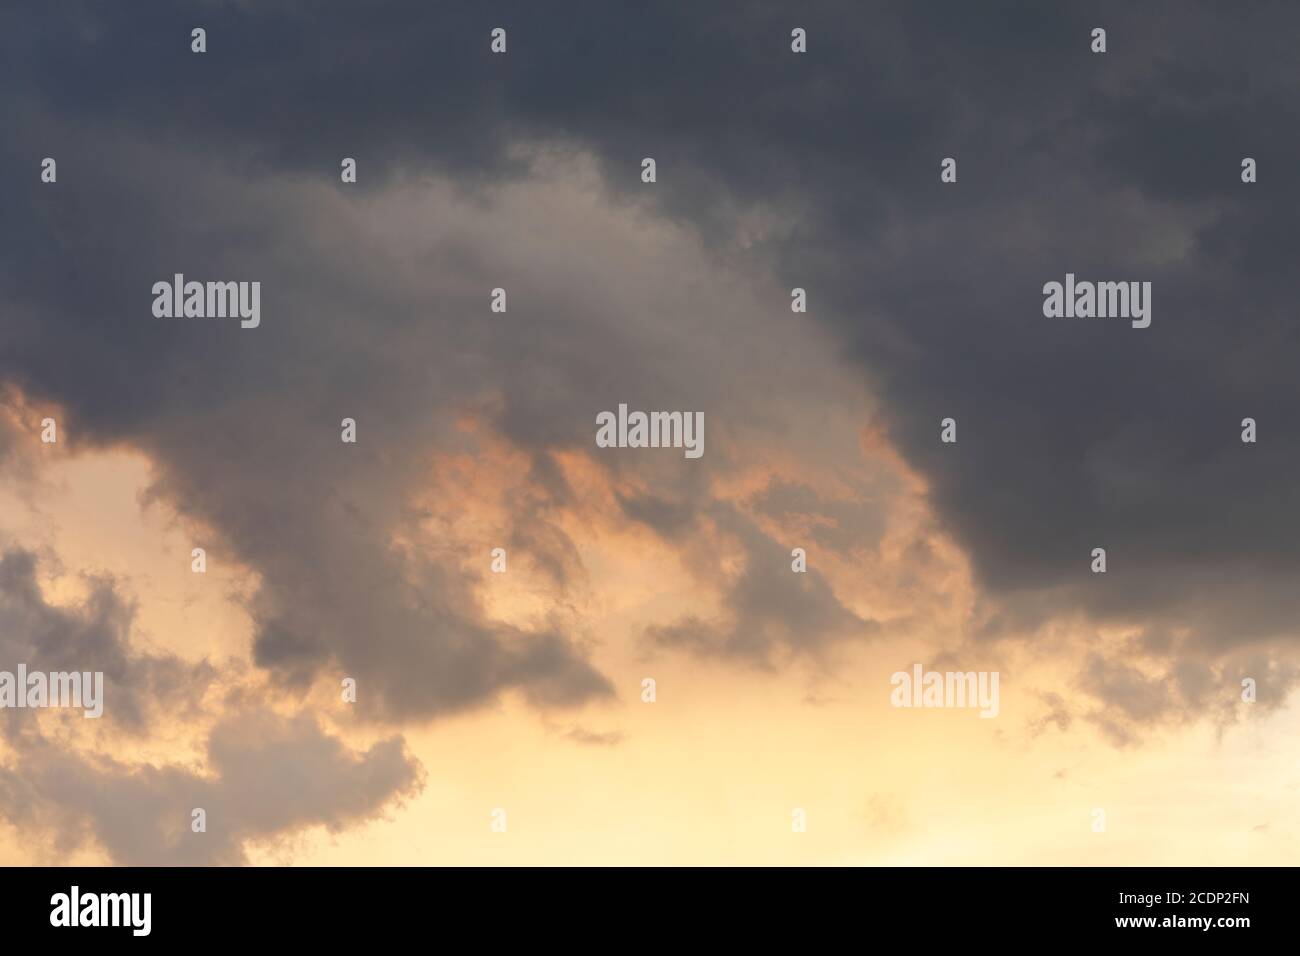 Thunderclouds in summertime Stock Photo